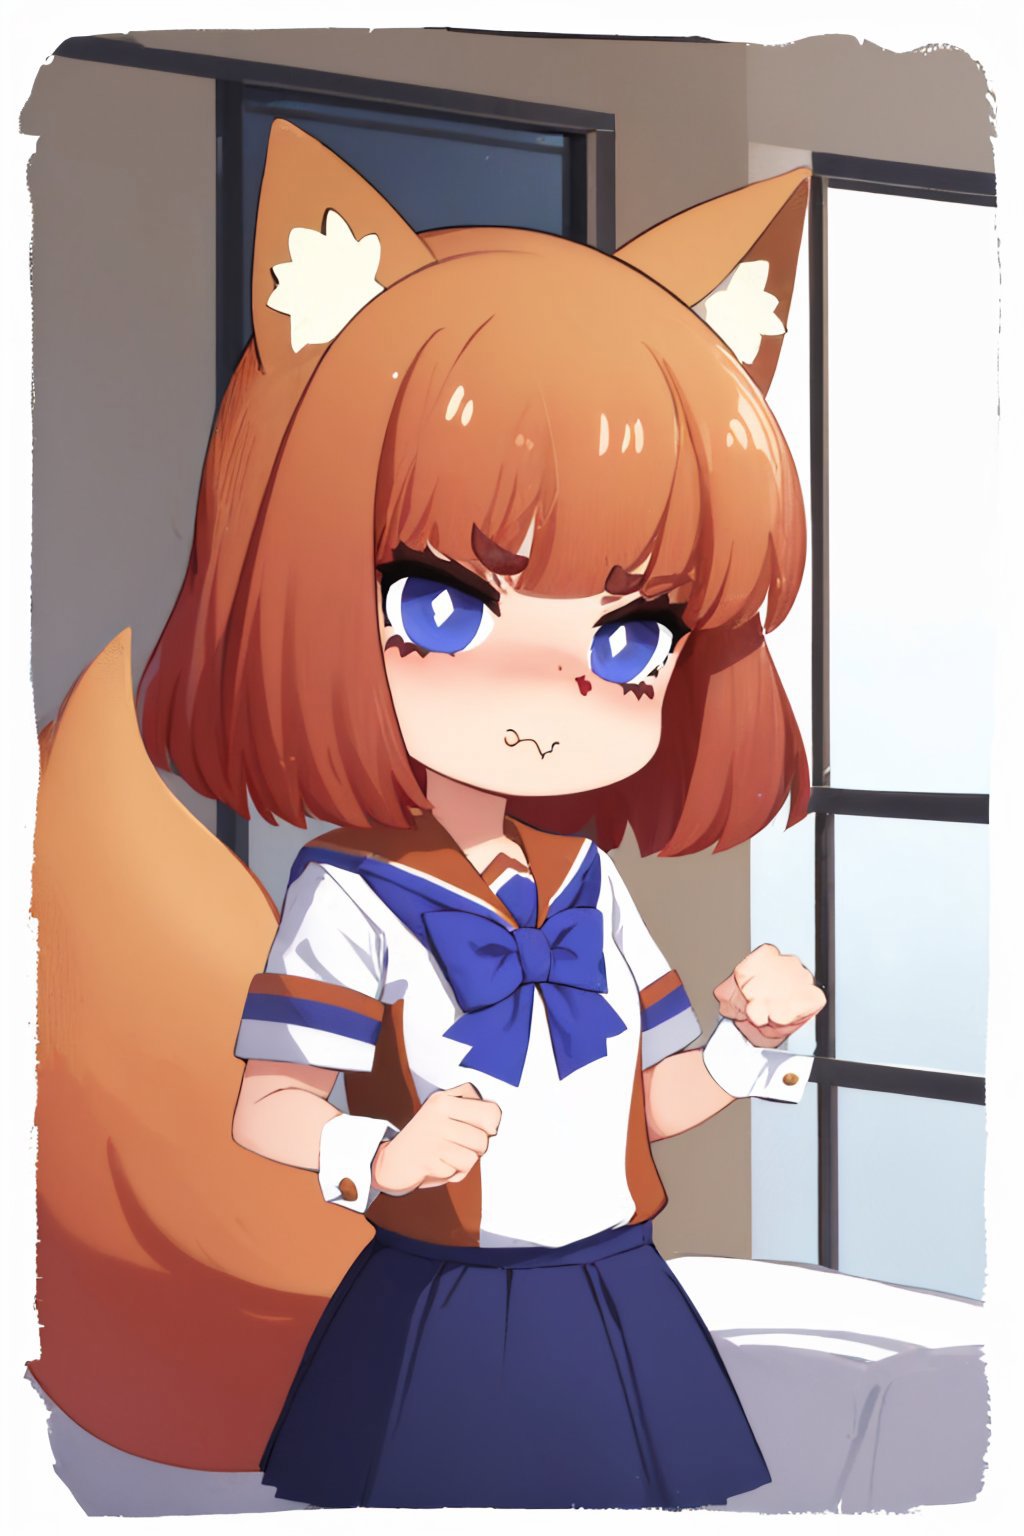 Firefox-chan understands your private browsing needs : r/Animemes